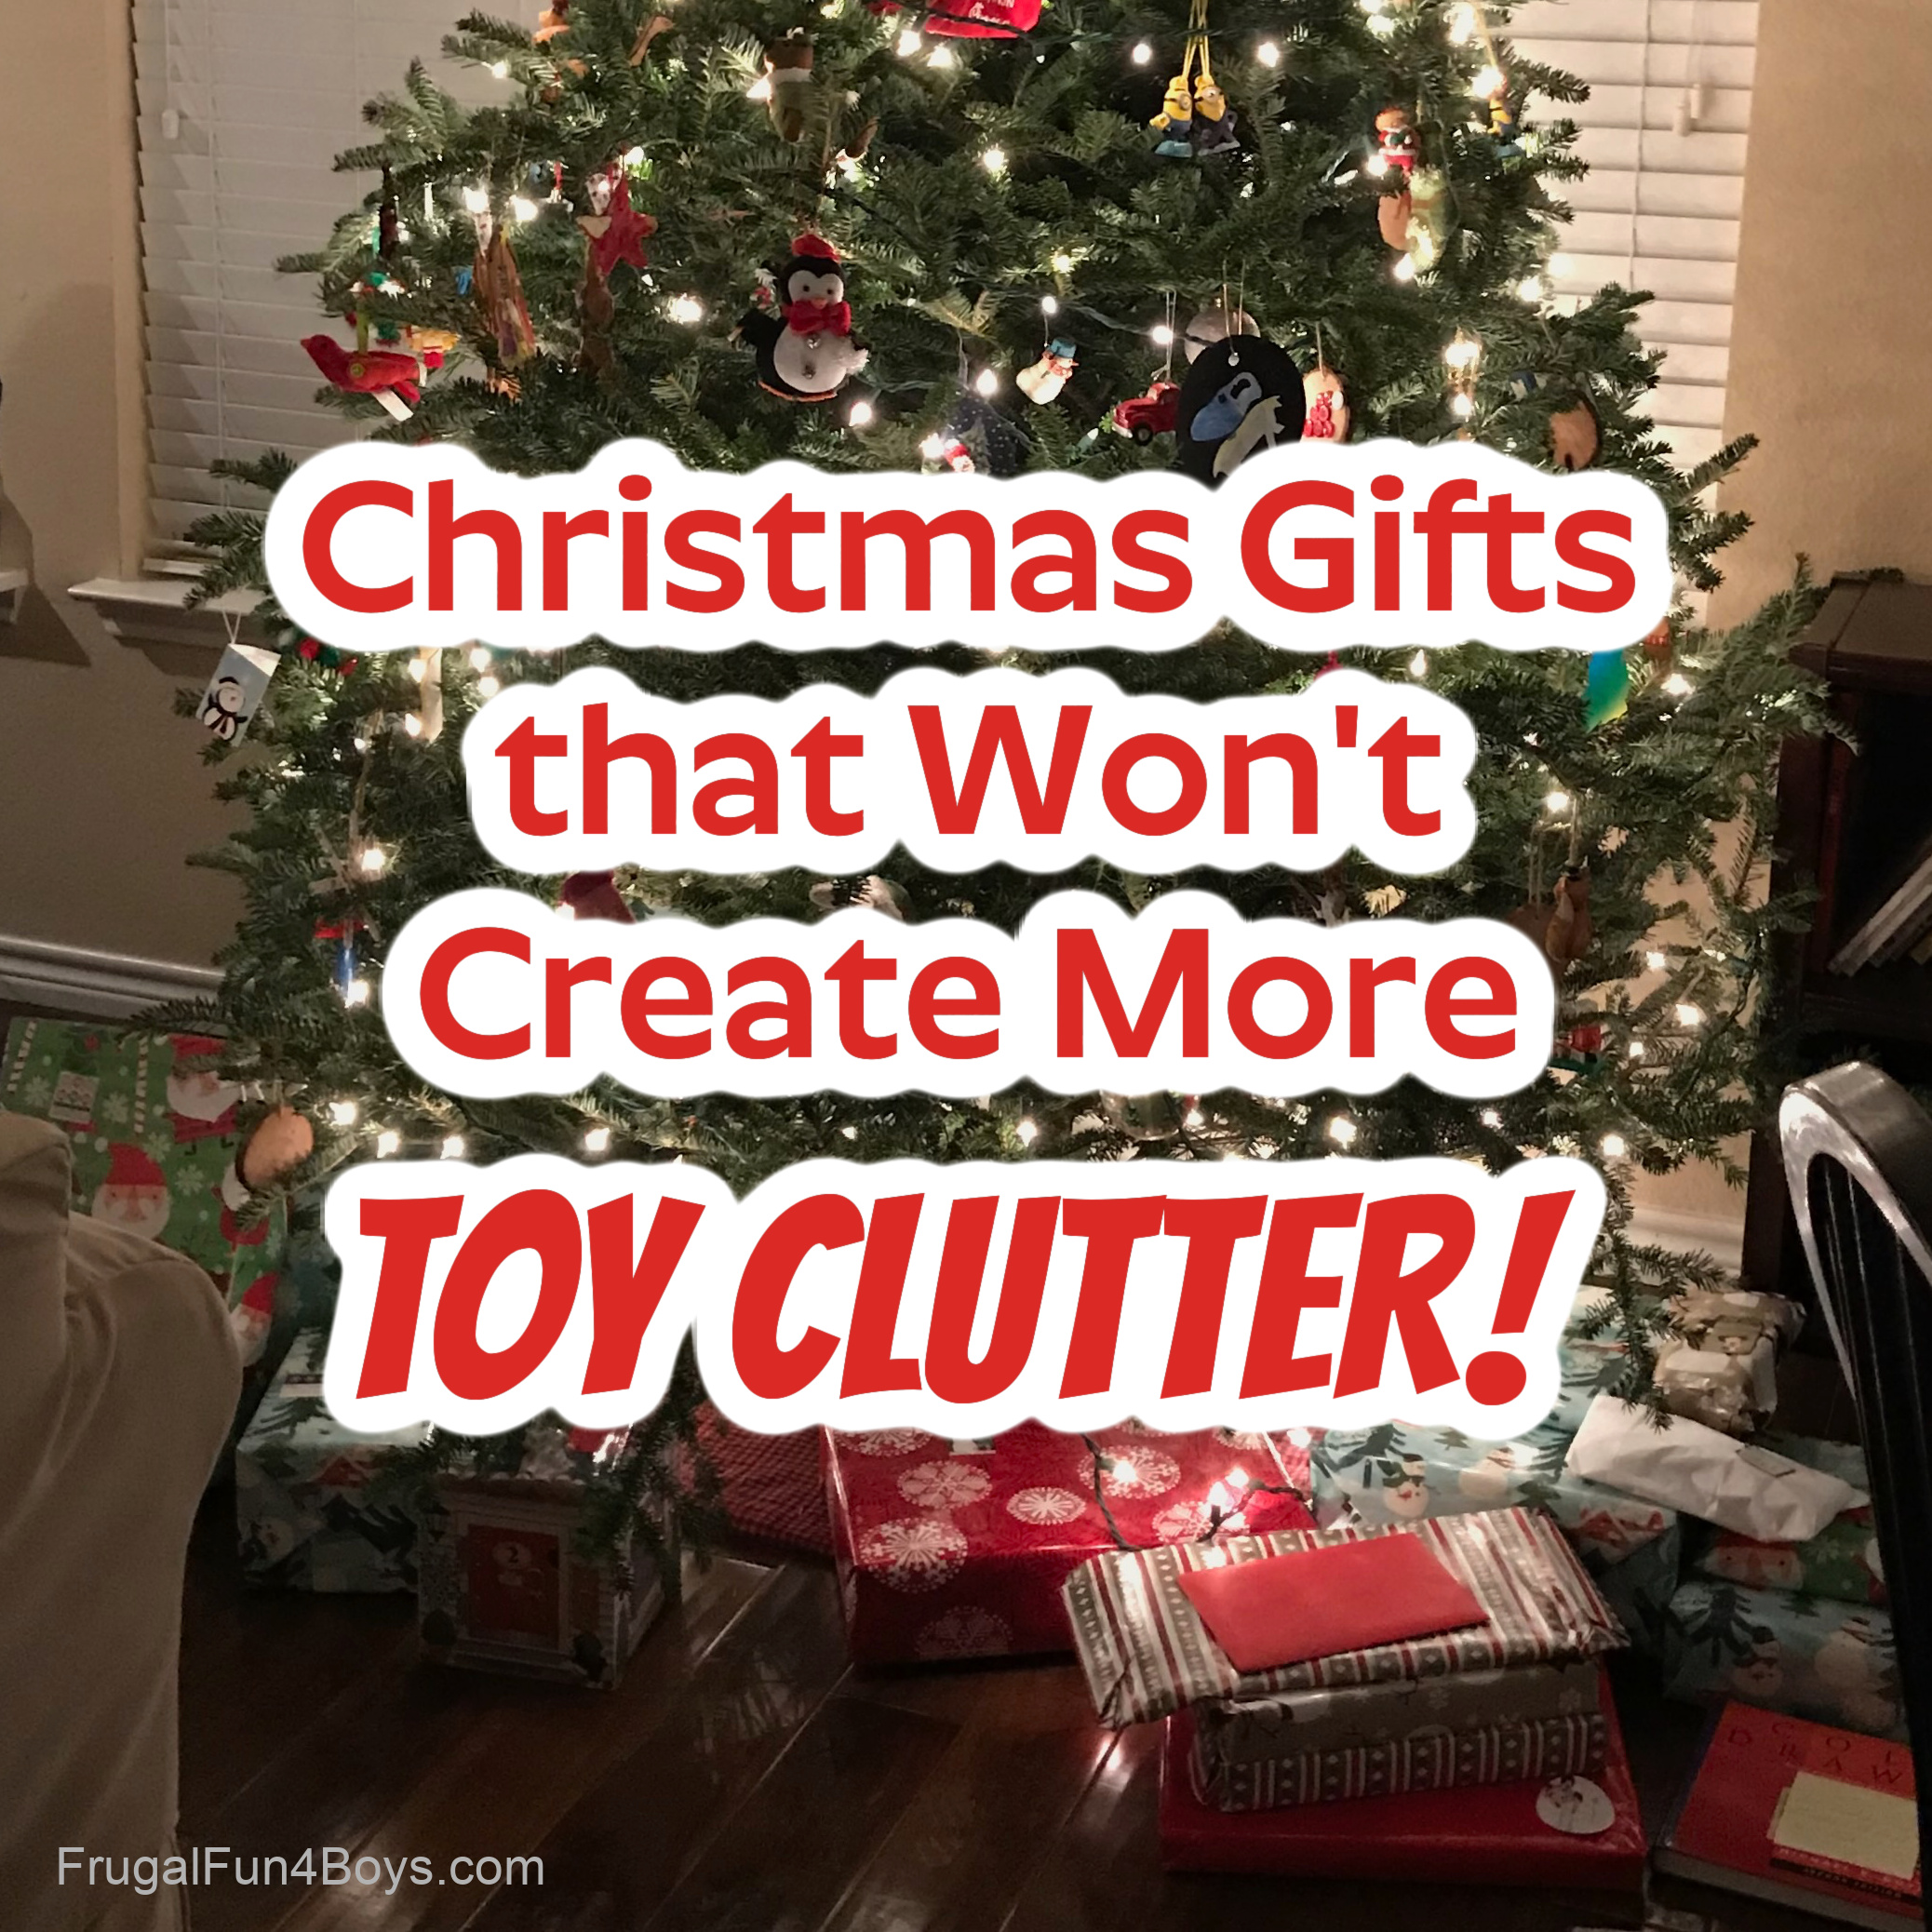 Clutter-Free Gift Ideas -- The Ultimate List for All Ages!